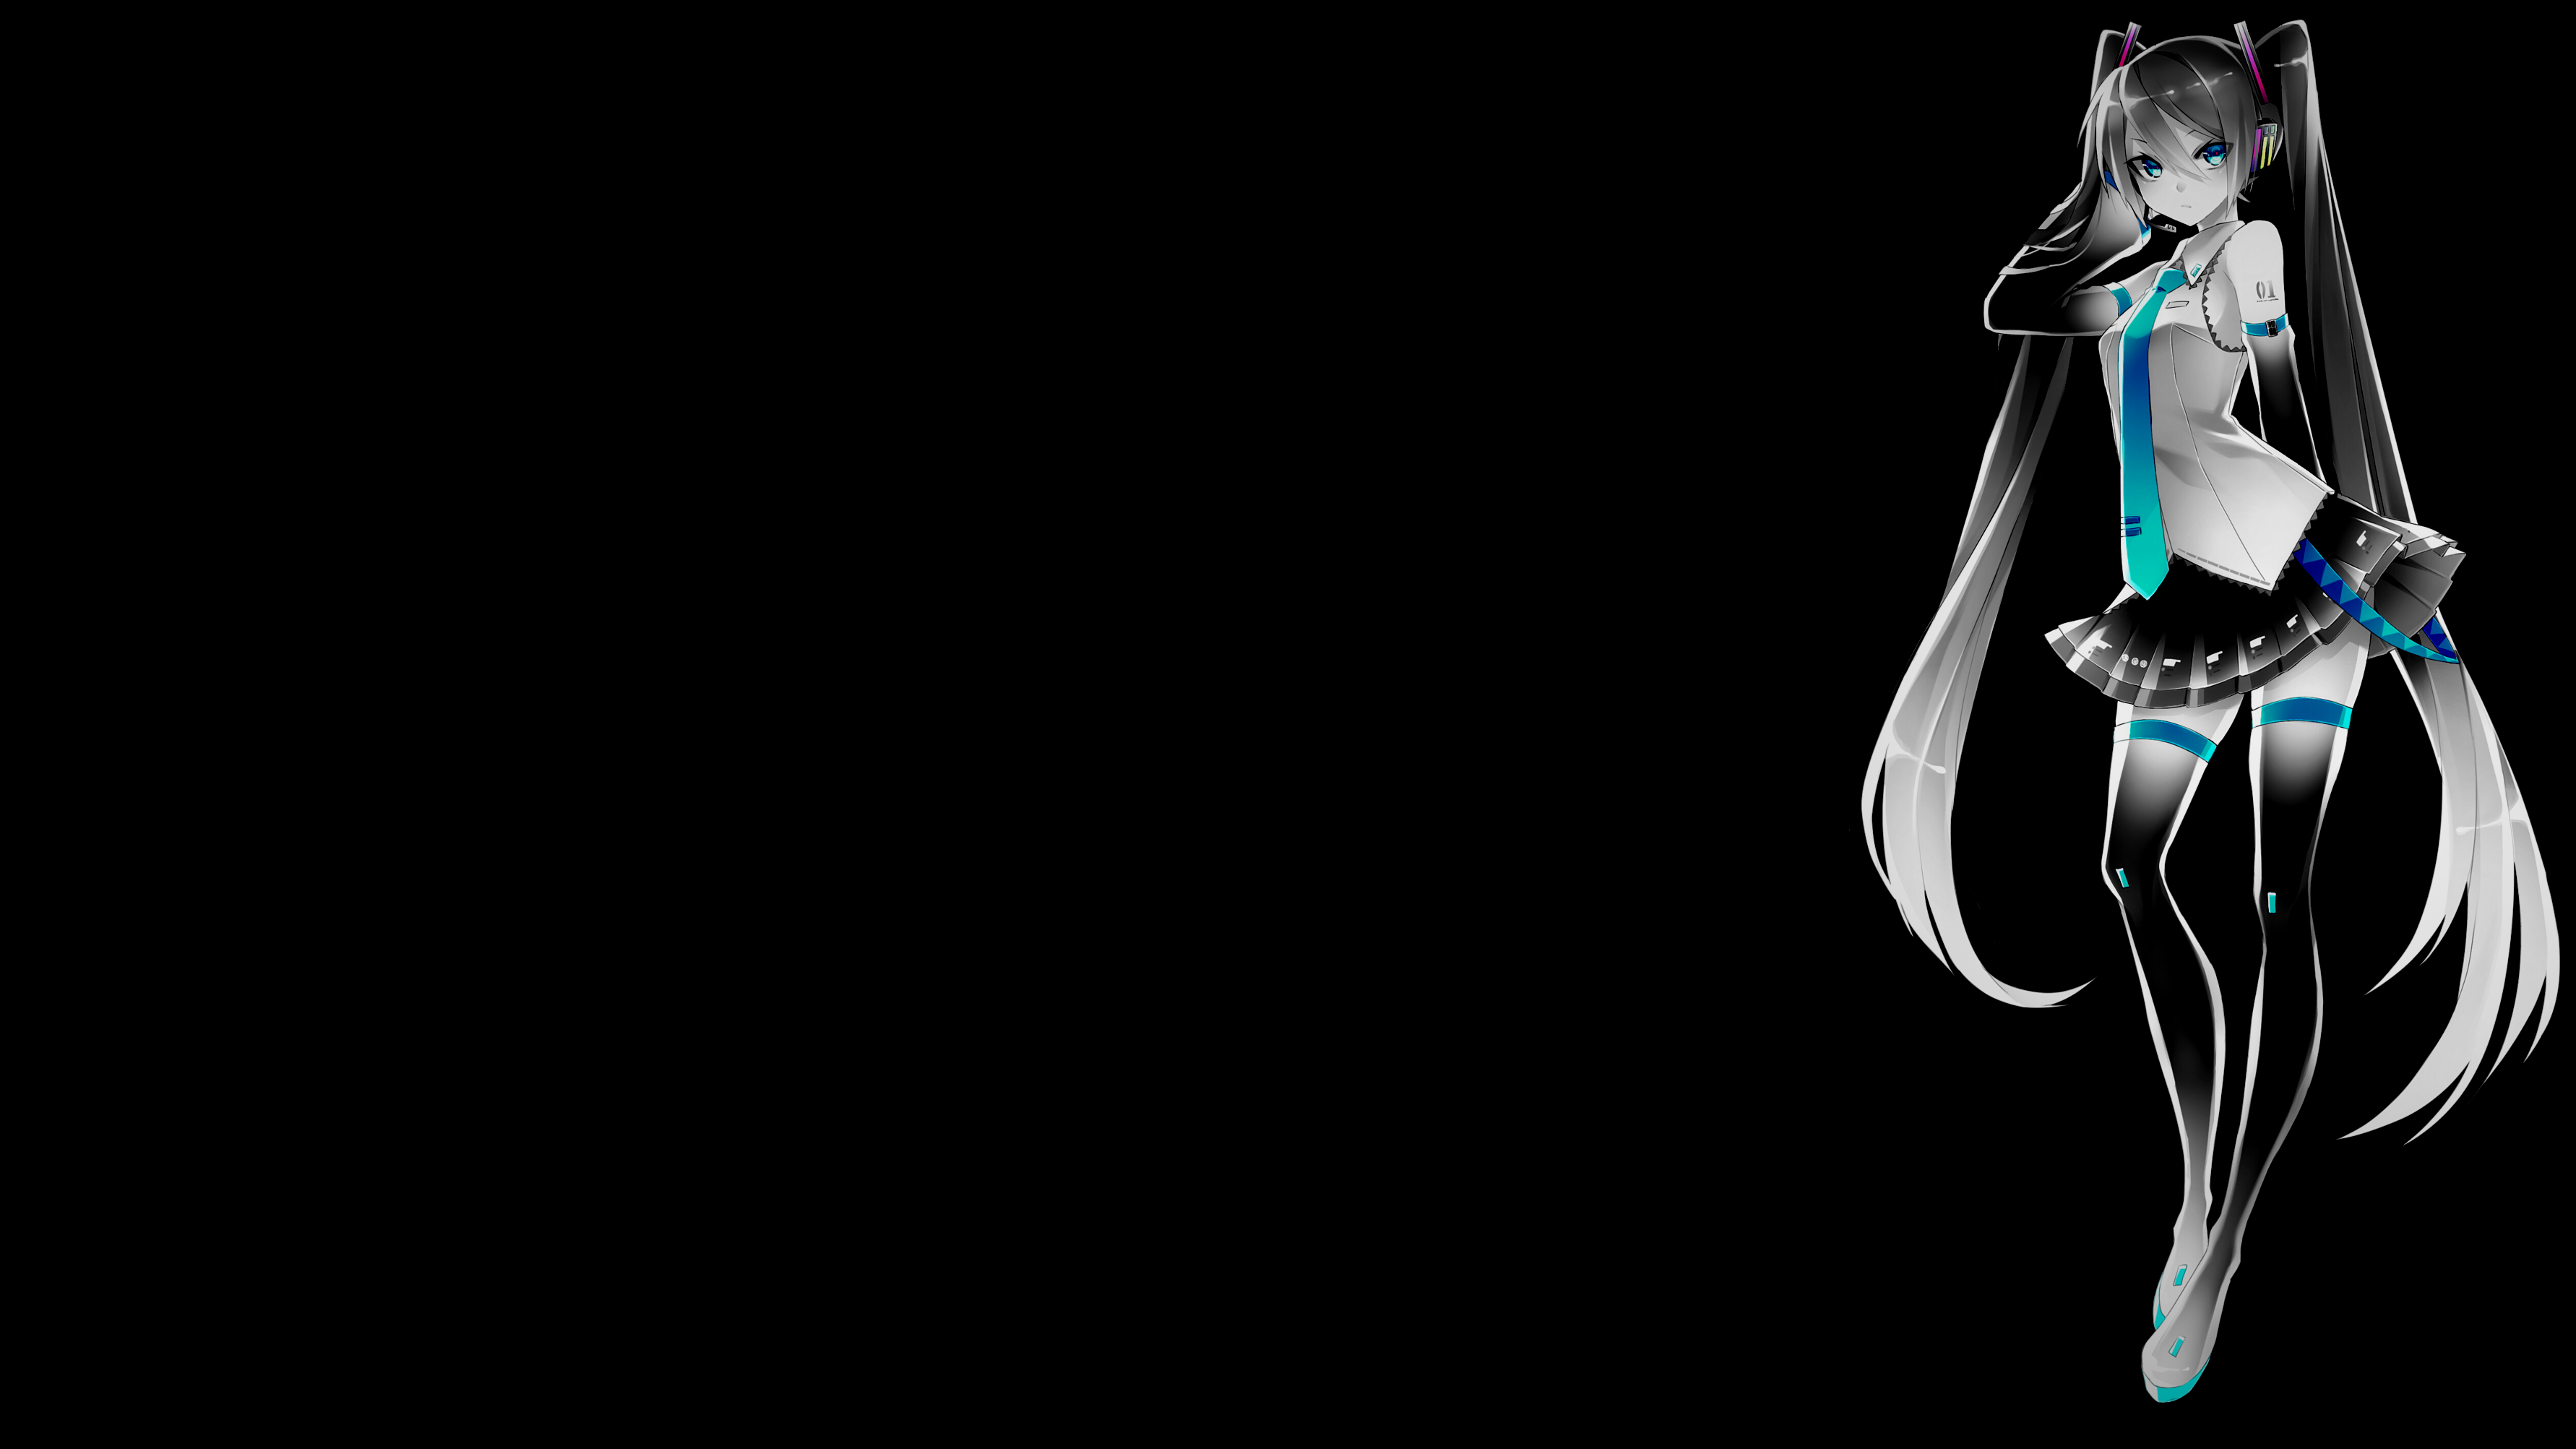 Anime 3565x2005 black background dark background simple background selective coloring anime girls Vocaloid Hatsune Miku